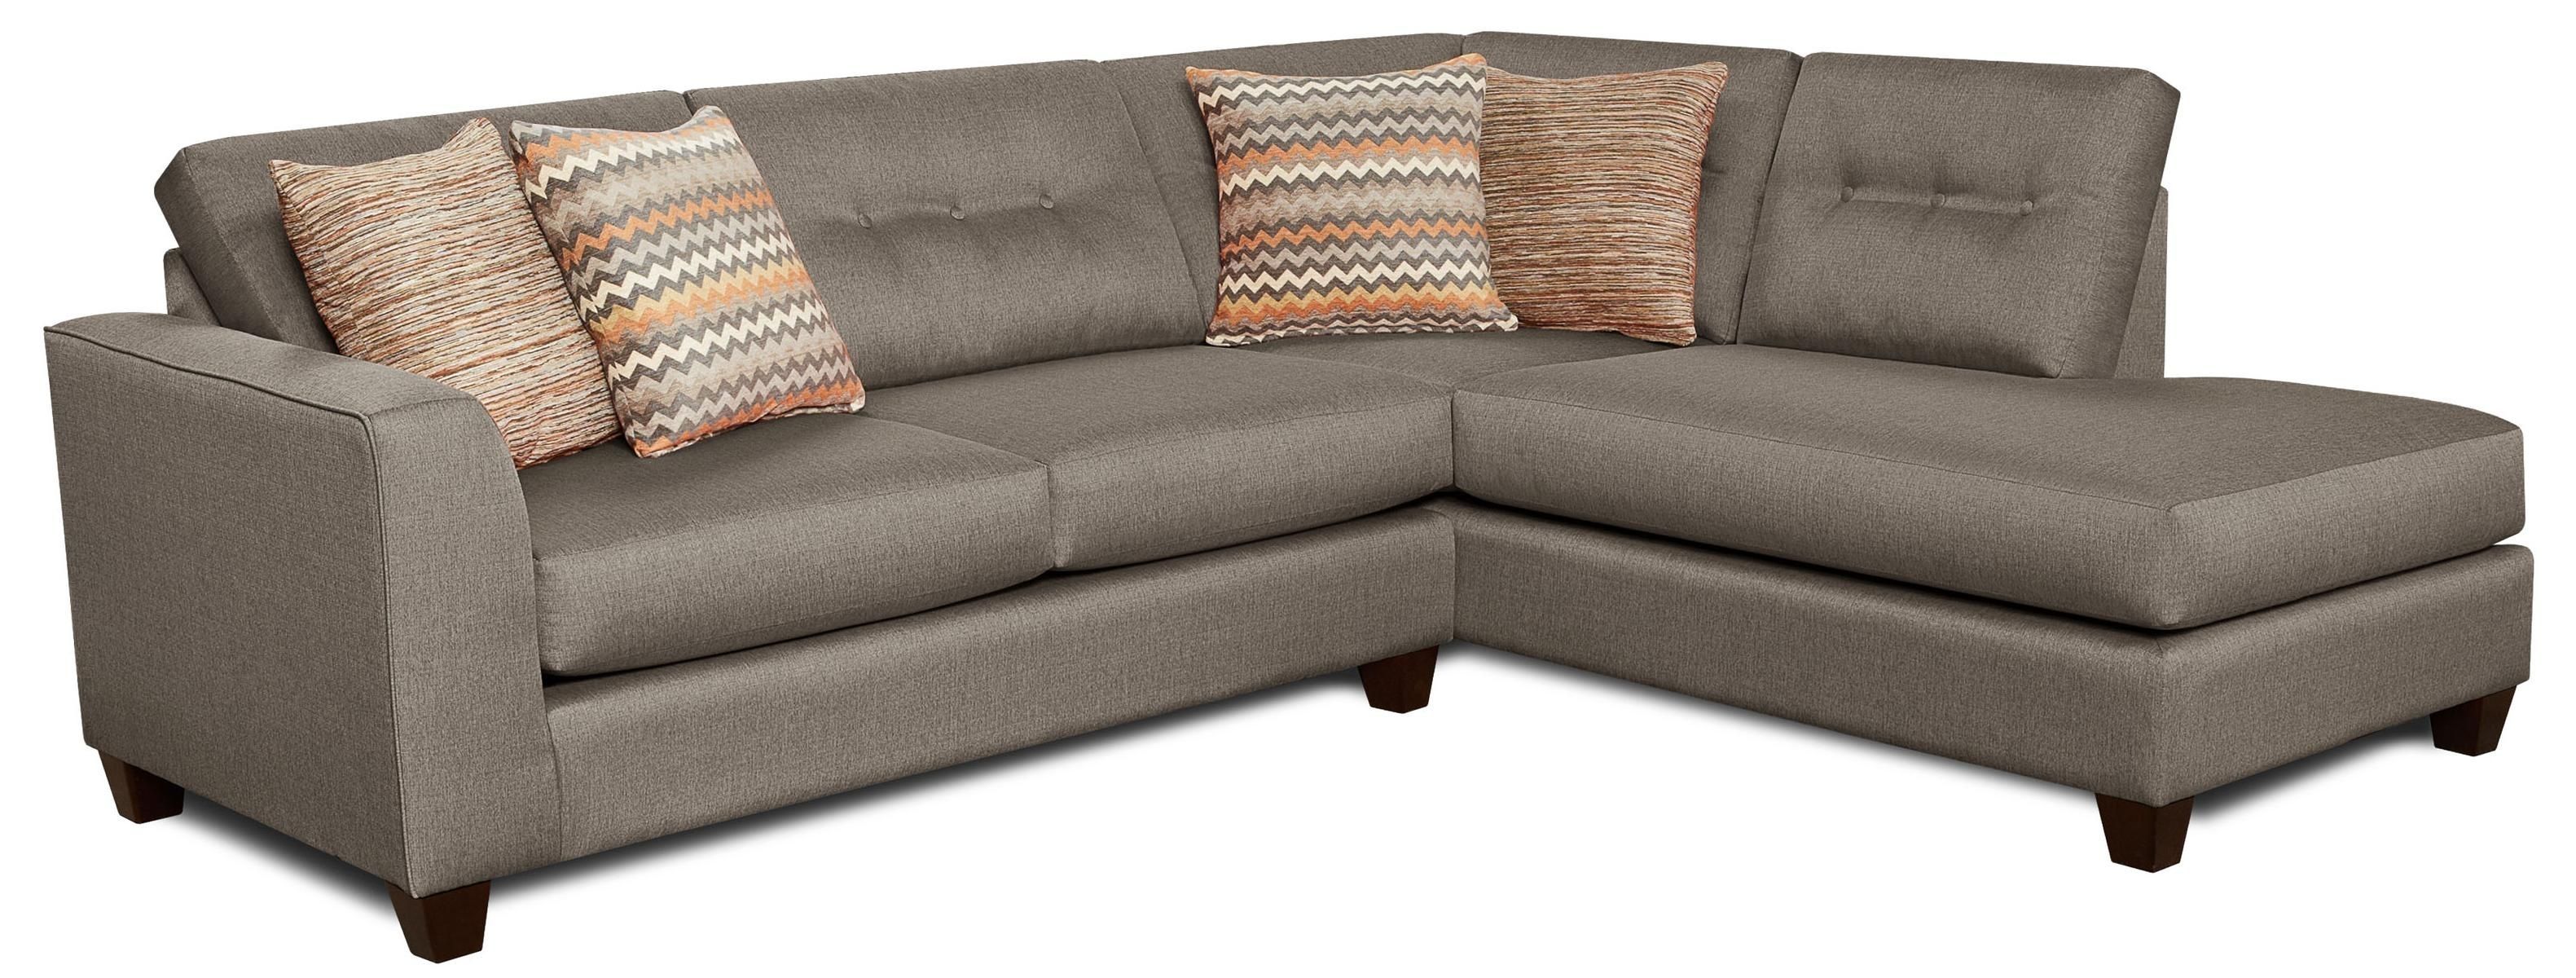 Fandago Flame Sectional Sofafusion Furniture | Dc House Intended For London Optical Reversible Sofa Chaise Sectionals (View 8 of 30)